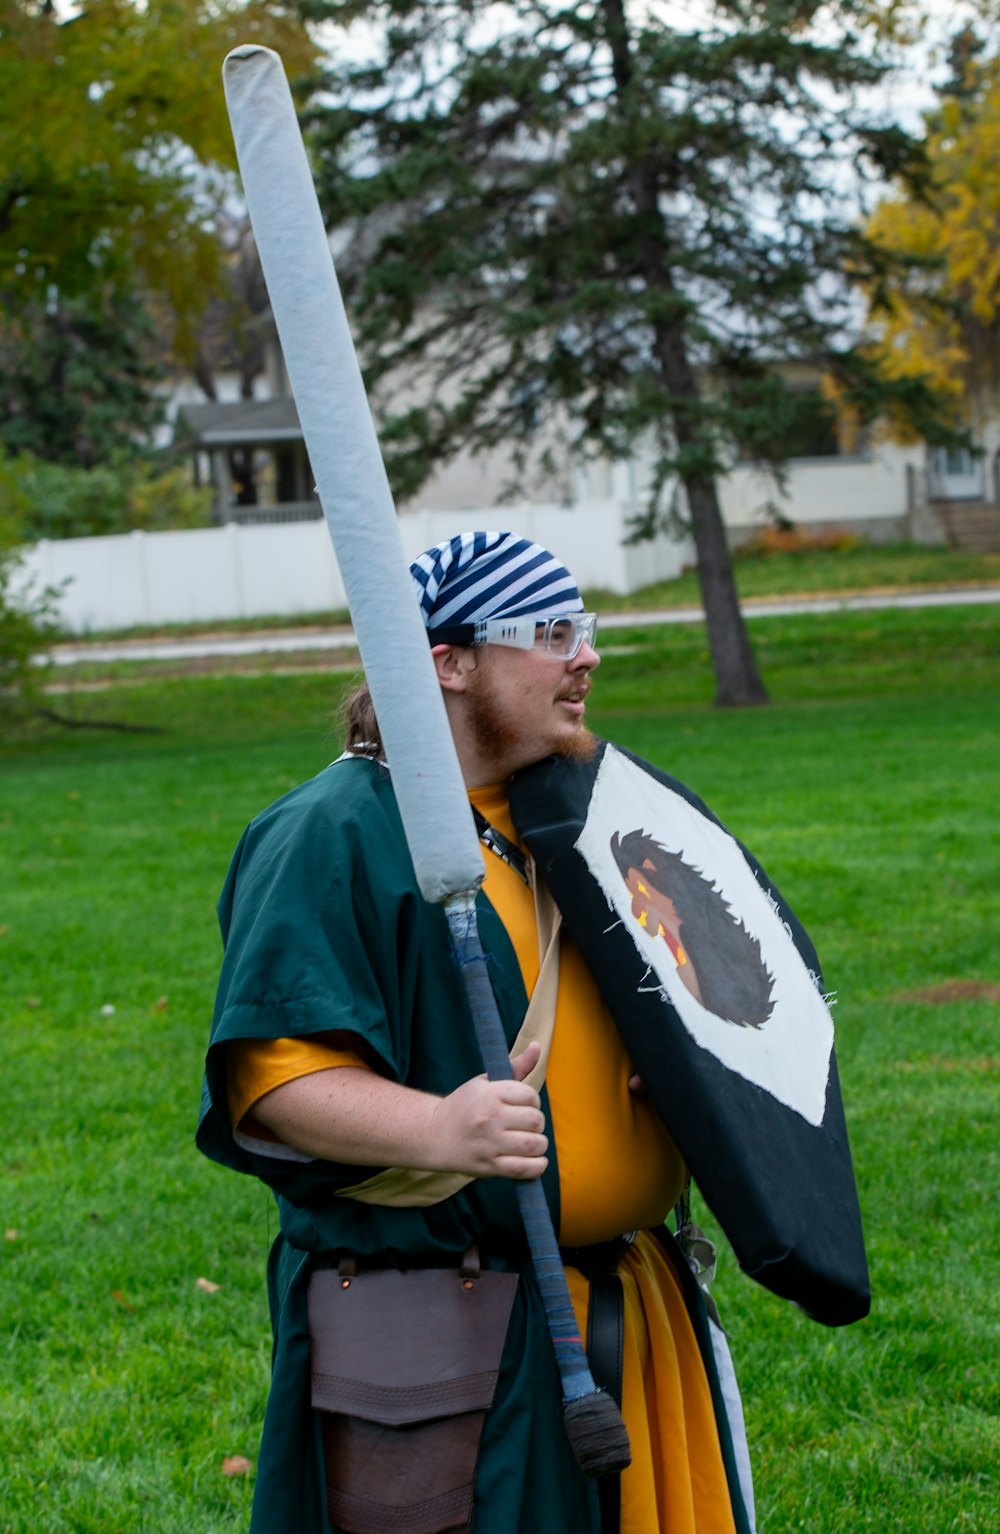 a man in a costume holding a sword and shield